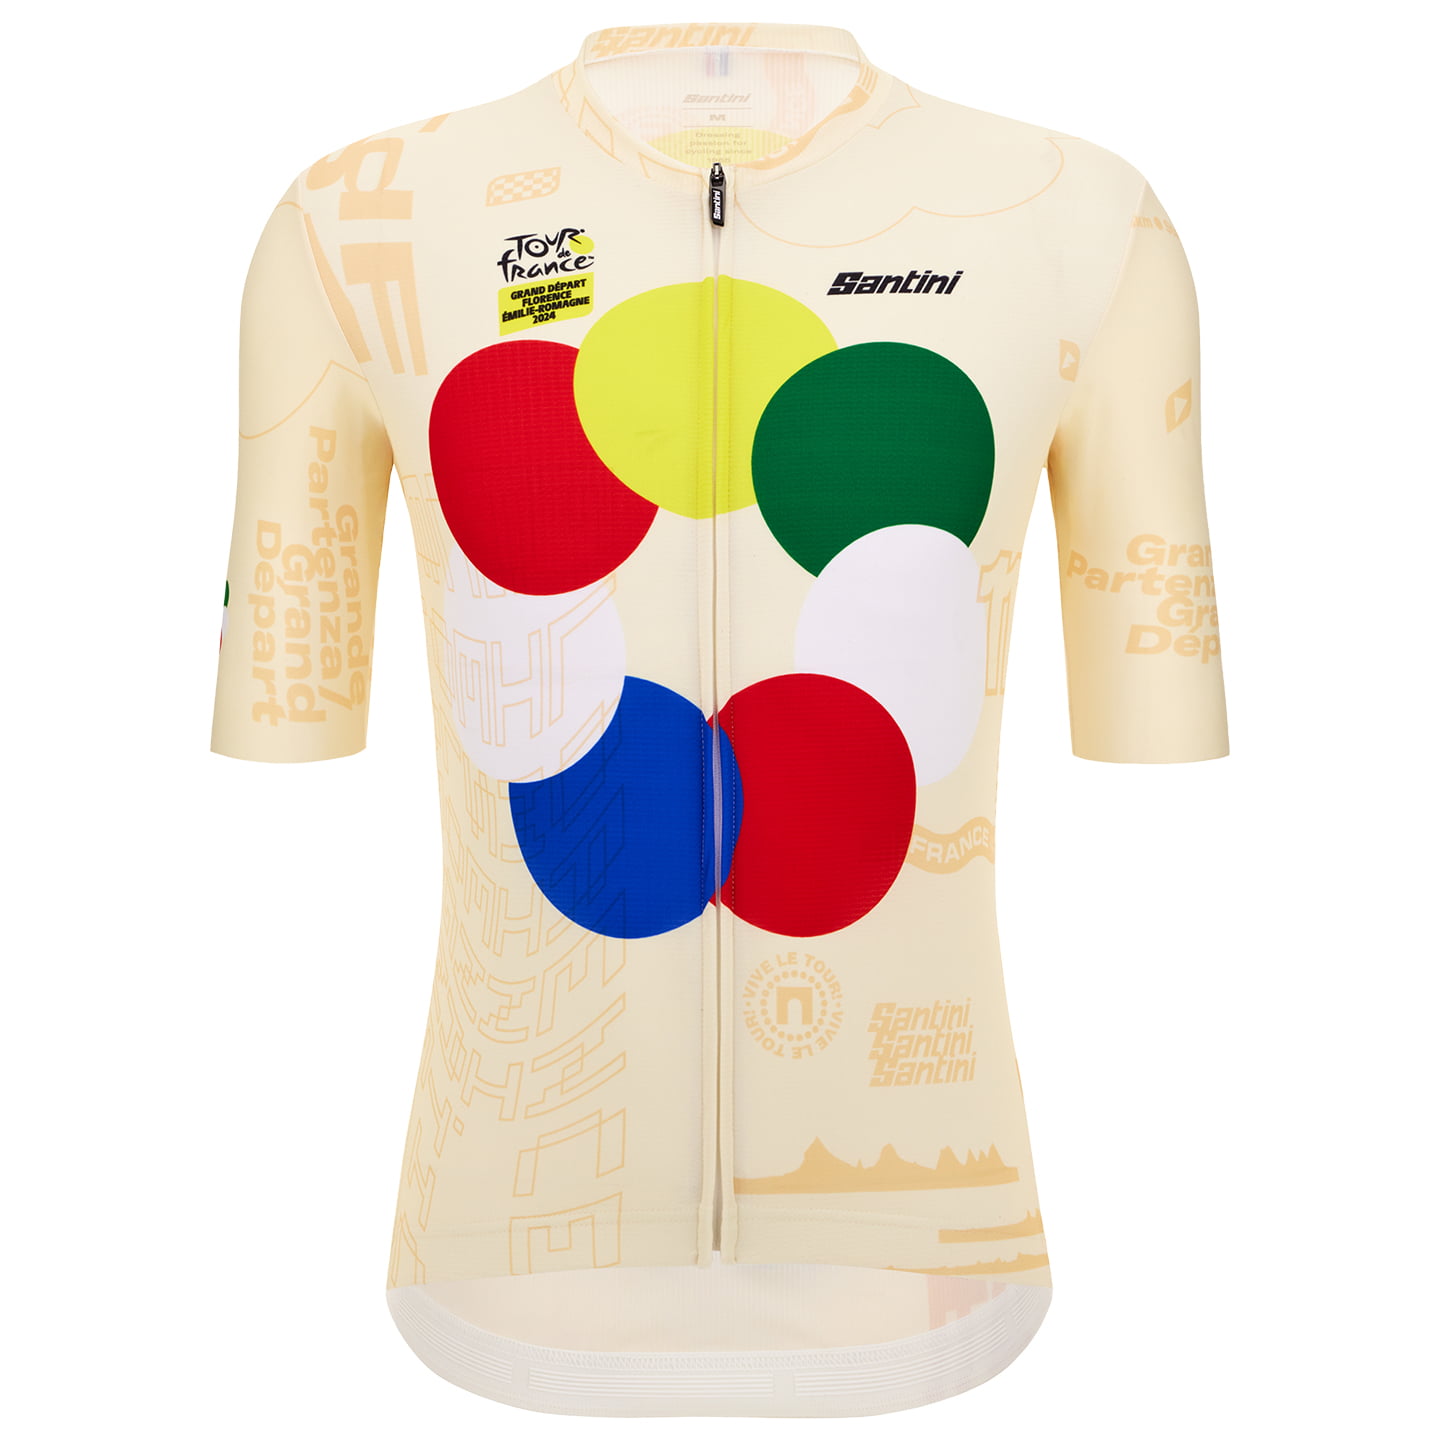 TOUR DE FRANCE Grand Depart Florence 2024 Short Sleeve Jersey, for men, size S, Cycling jersey, Cycling clothing